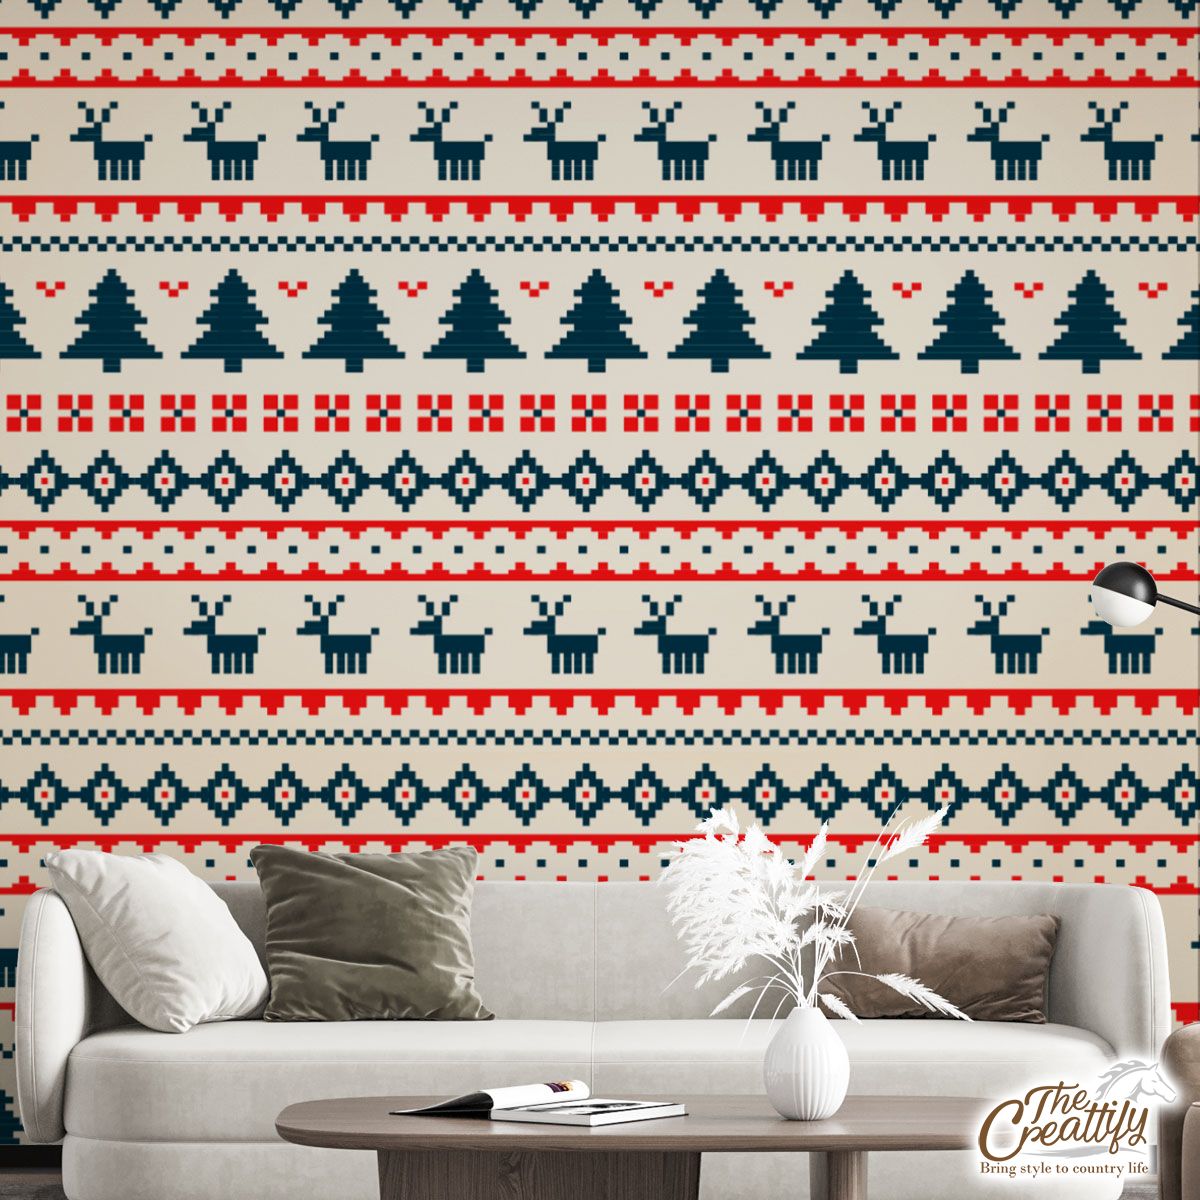 Ugly Patterns With Santas Reindeer And Pine Tree Wall Mural